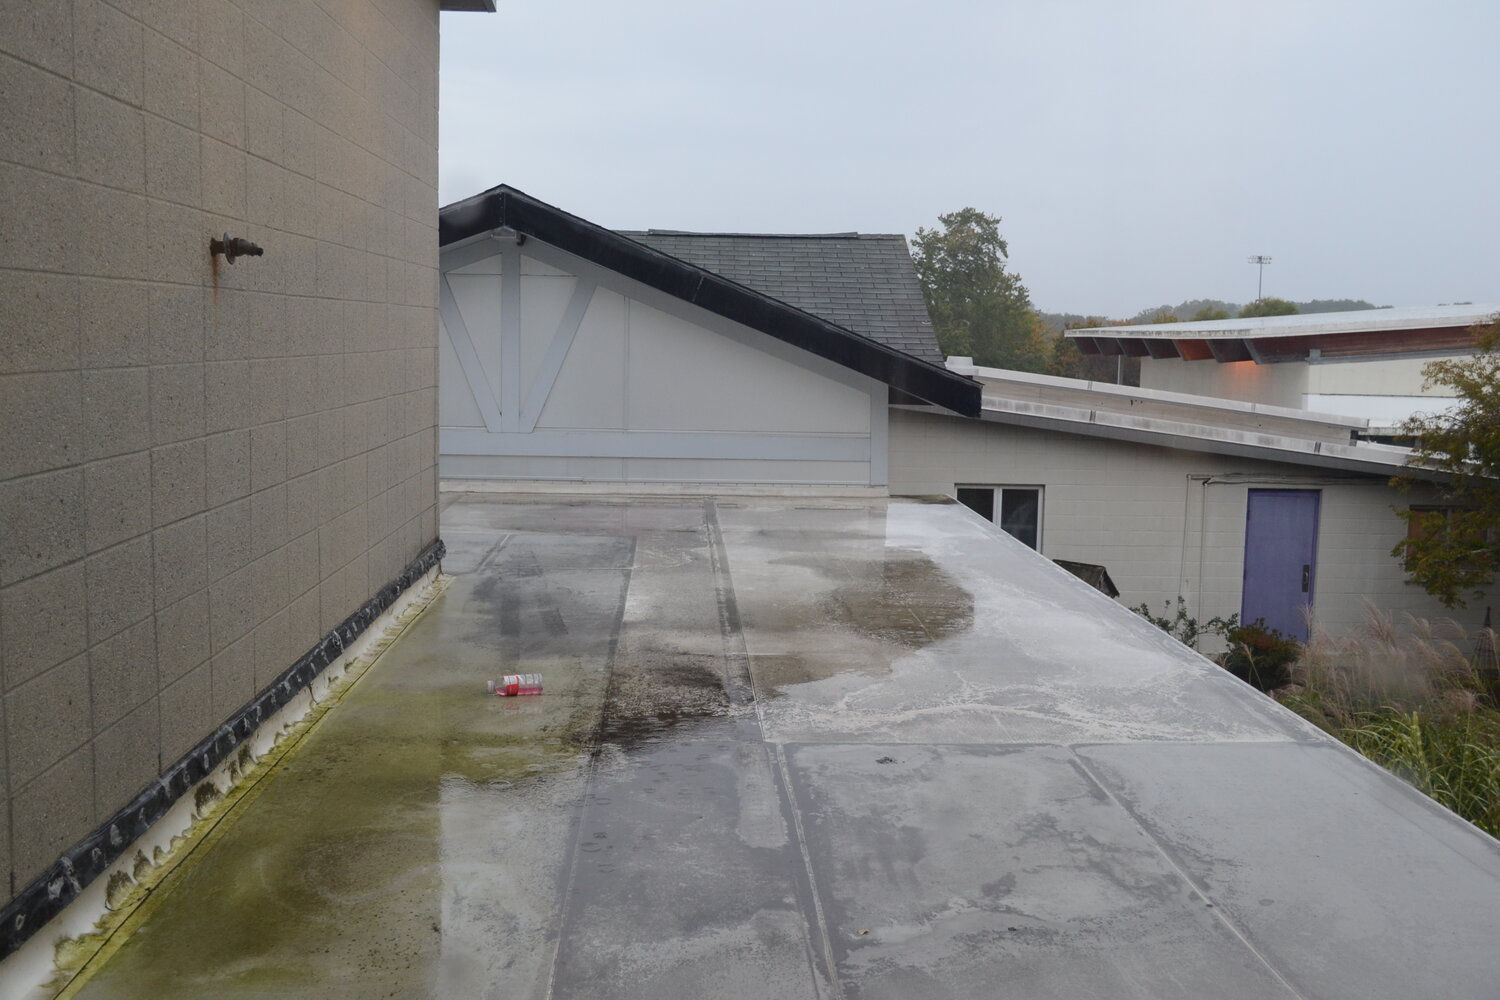 Water pooling on the roof can be seen from a window on the upper floor. Administrators and students alike say leaks are a nonstop occurrence throughout the year.